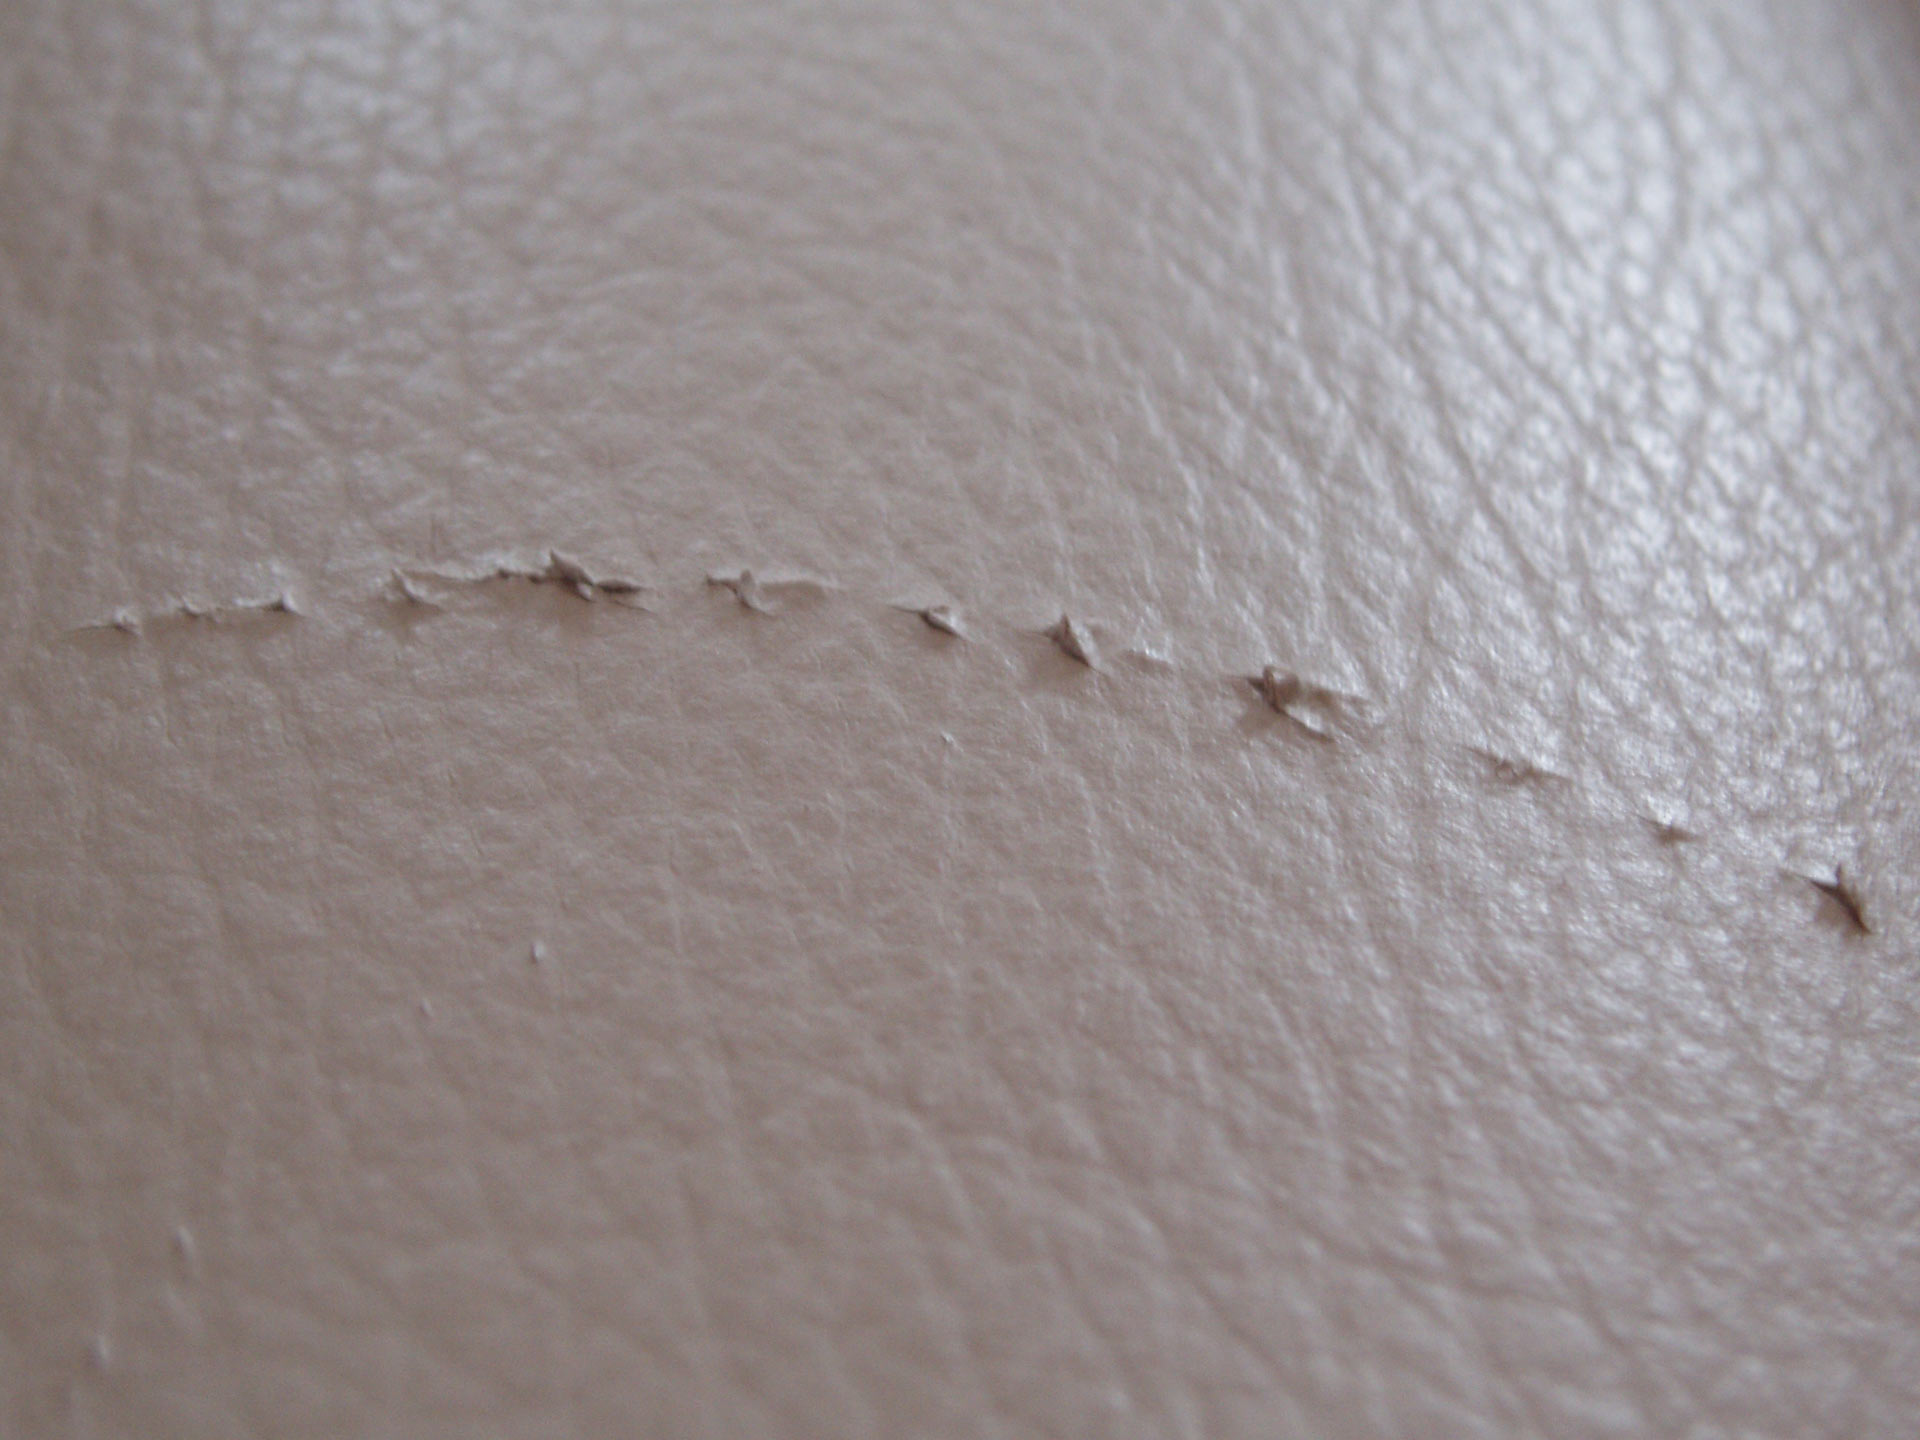 How to repair cat scratches on leather?